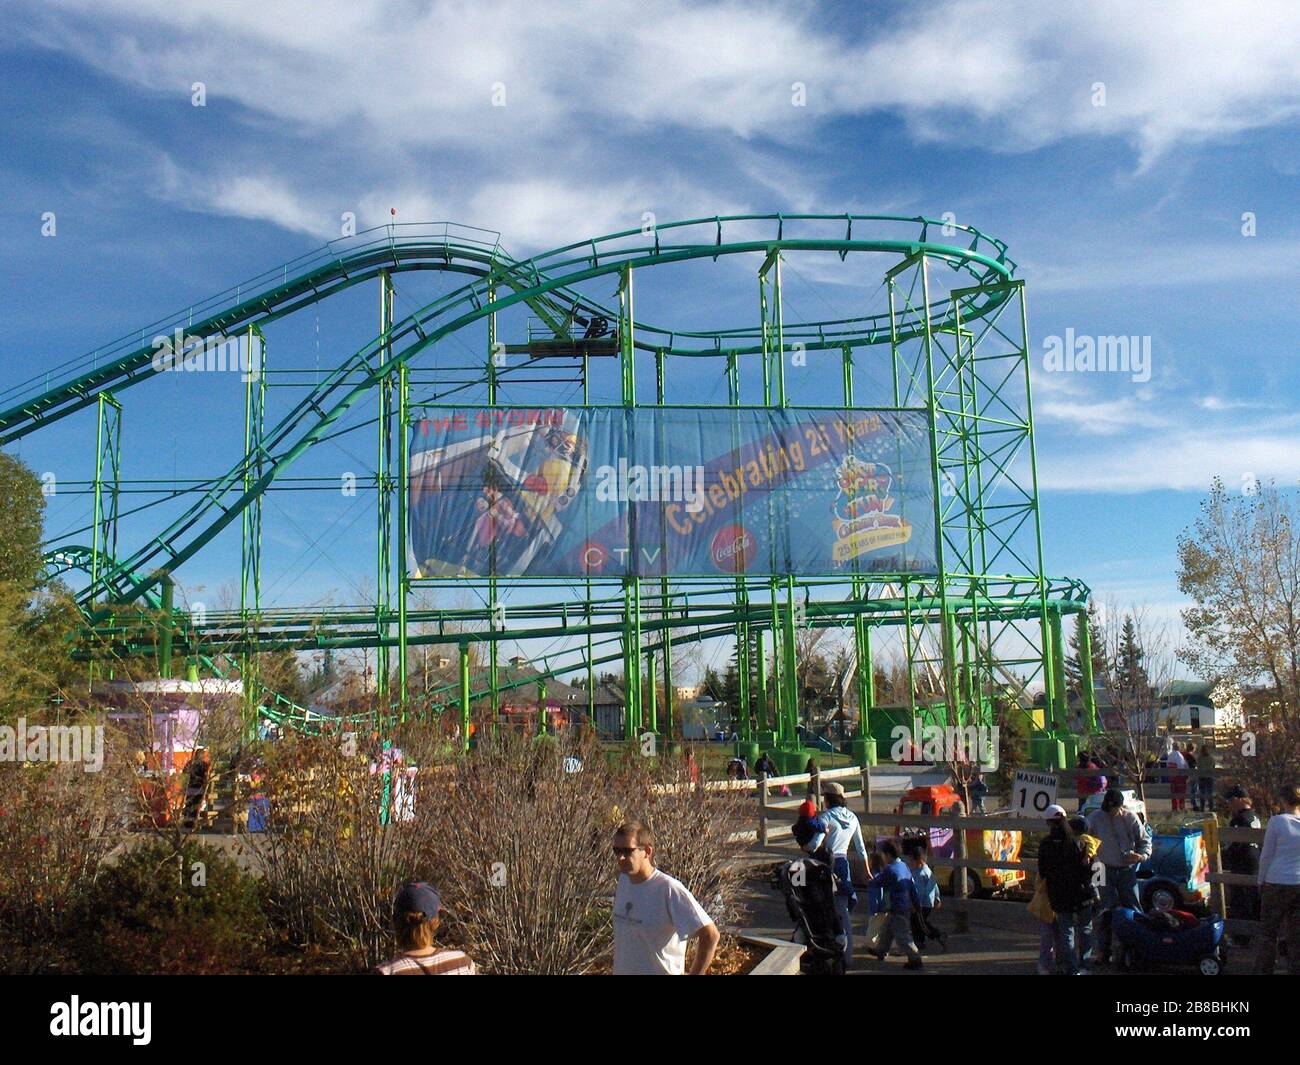 'English: Calaway Park (Calgary, Canada) - A banner of Calaway celebrating it's 25th Anniversary with the new ride Storm, posted on Vortex's (the roller coaster) side railings. Other rides are shown, including Swirly Twirl (left), Super Trucks (right) and Ocean Motion in the background. The Calaway Cafe is shown behind vortex (gray-roofed building), and the Guest Services booth to the right of it (smaller white building).; 9 October 2006; Own work (Original text:  Picture shot by employee (ride operator) of Calaway); Jonathan Verge; ' Stock Photo